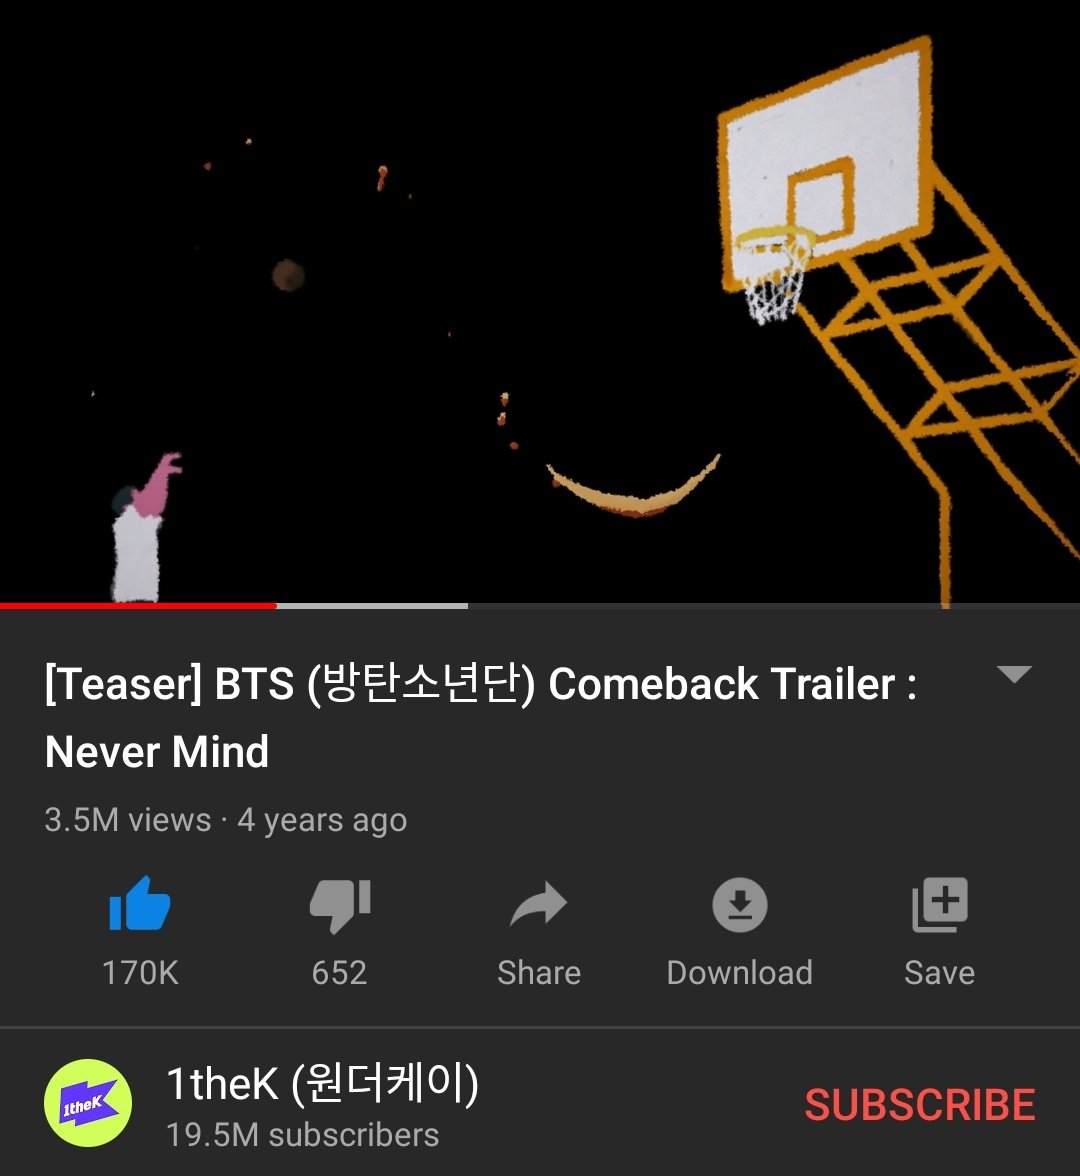 A fanmade video of just the translation came before this while searching which is really sad if I say so. Go watch the official mv for nevermind